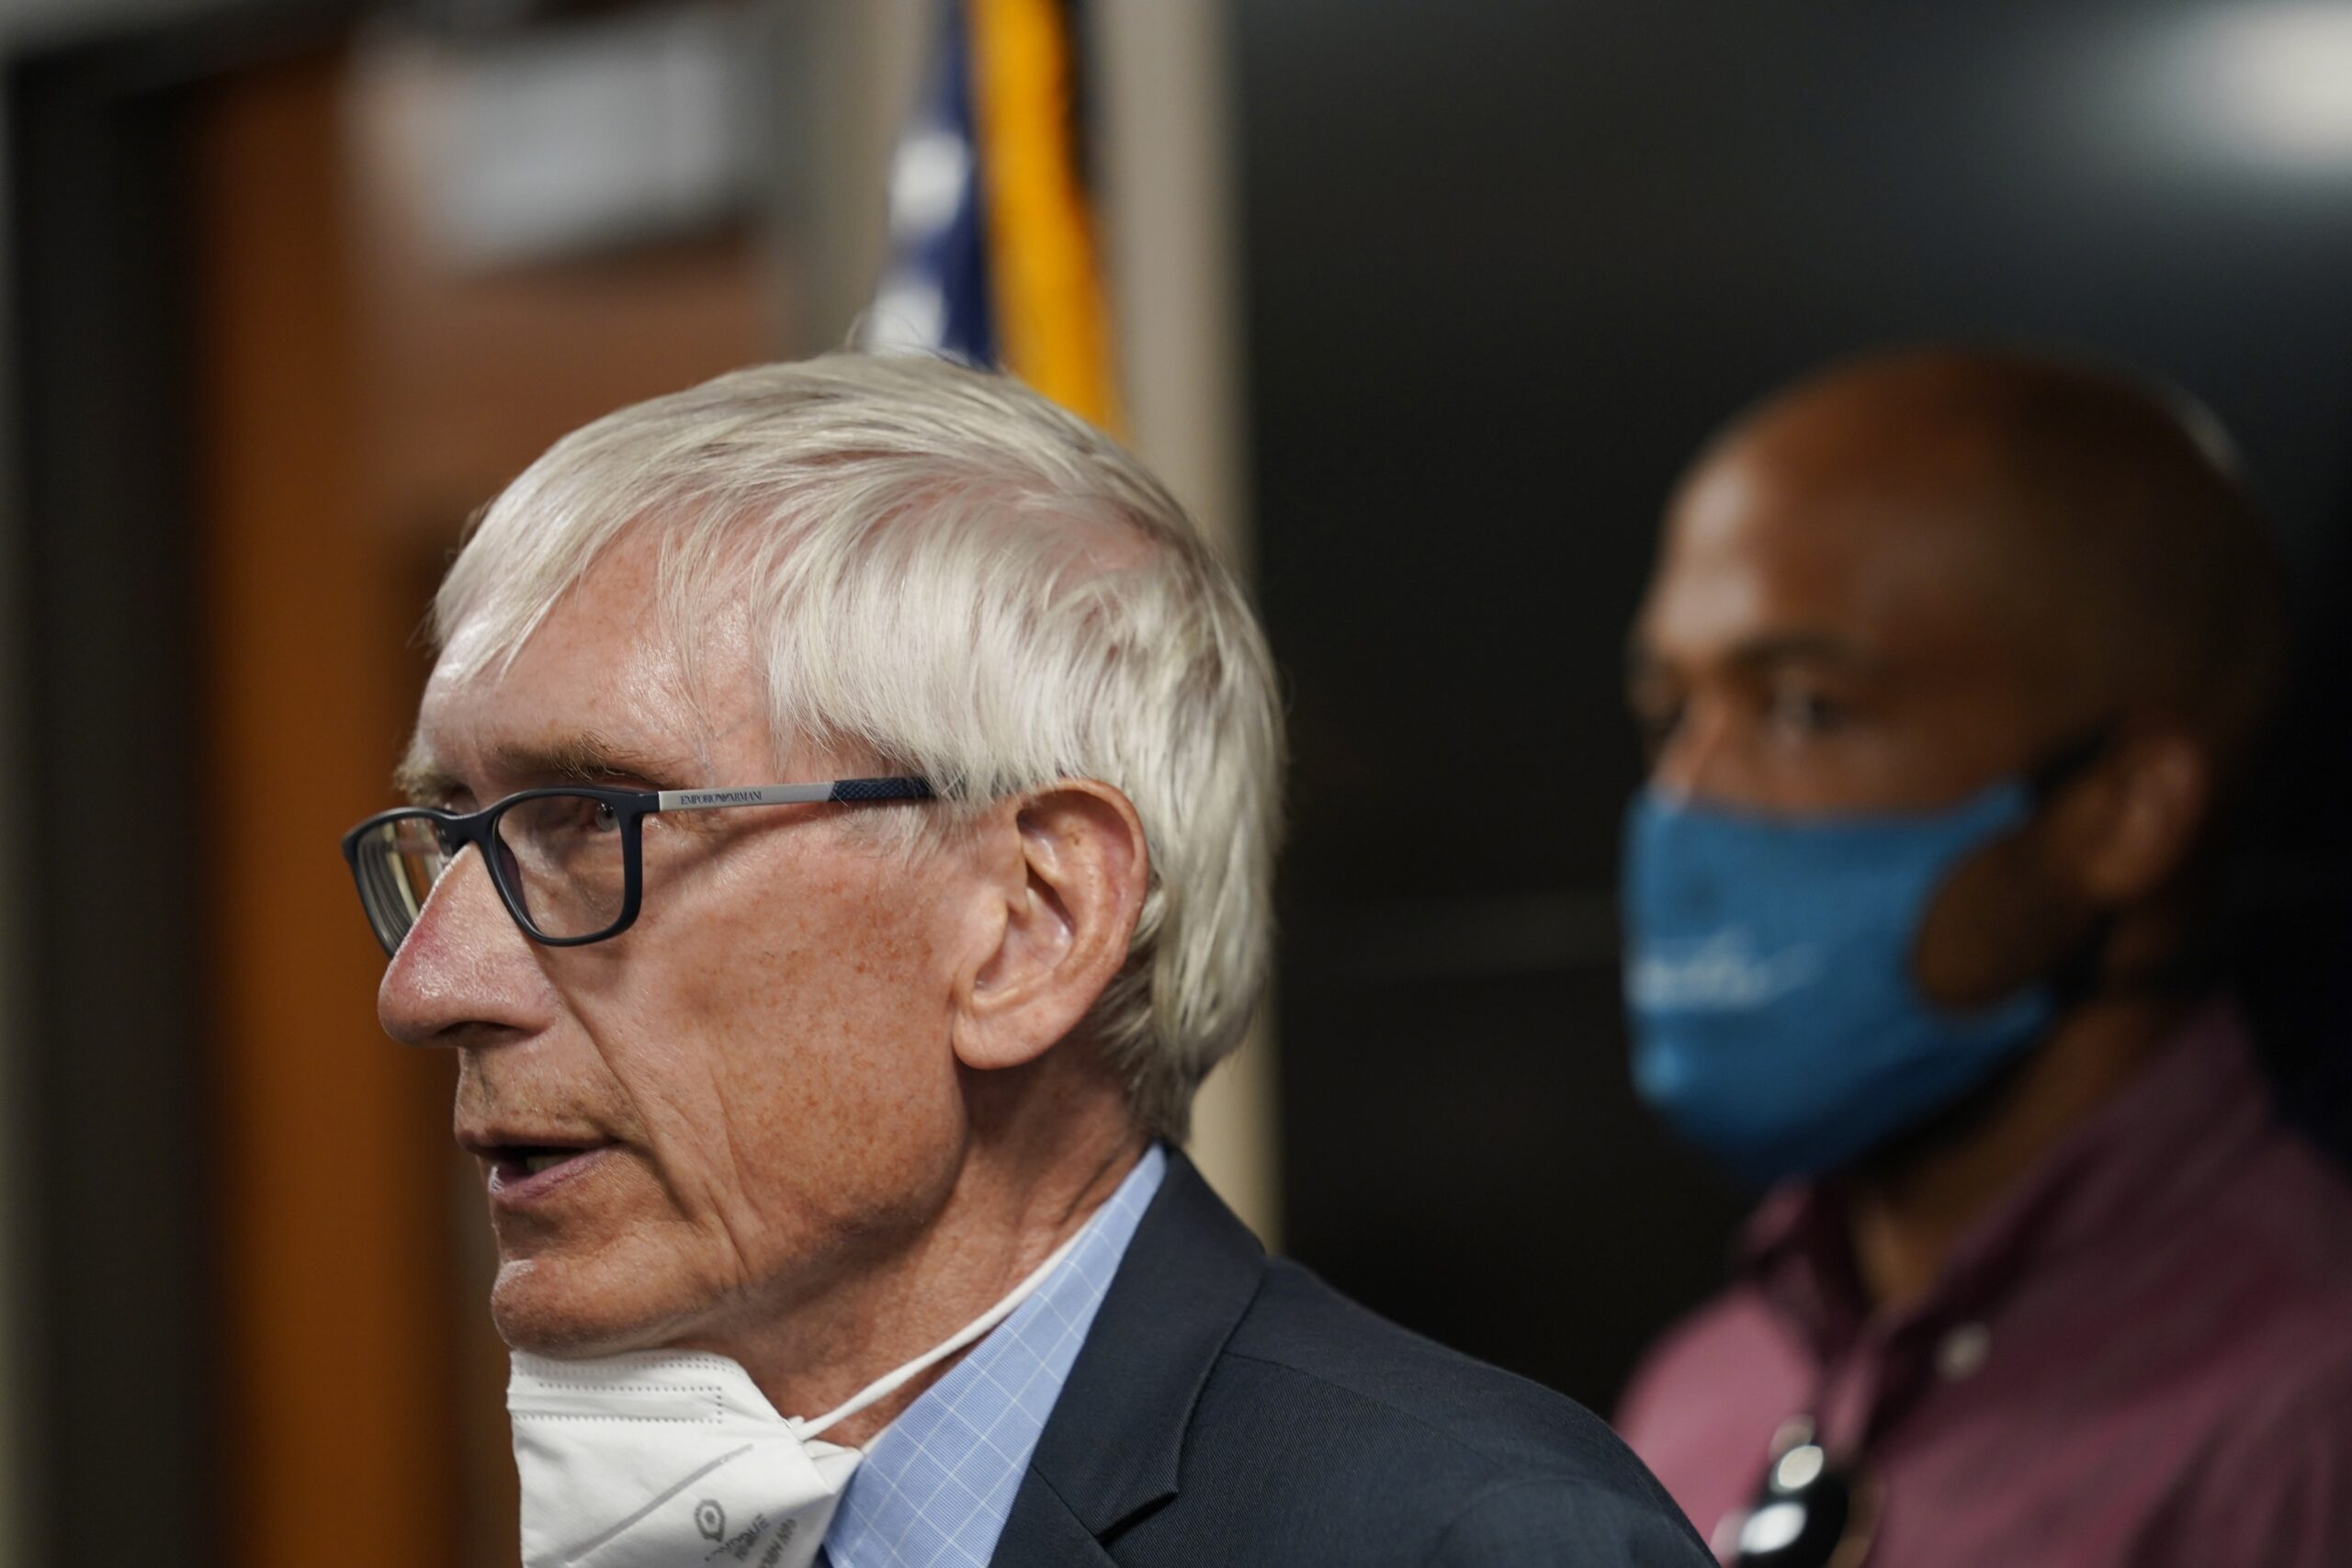 Tony Evers speaks during a news conference